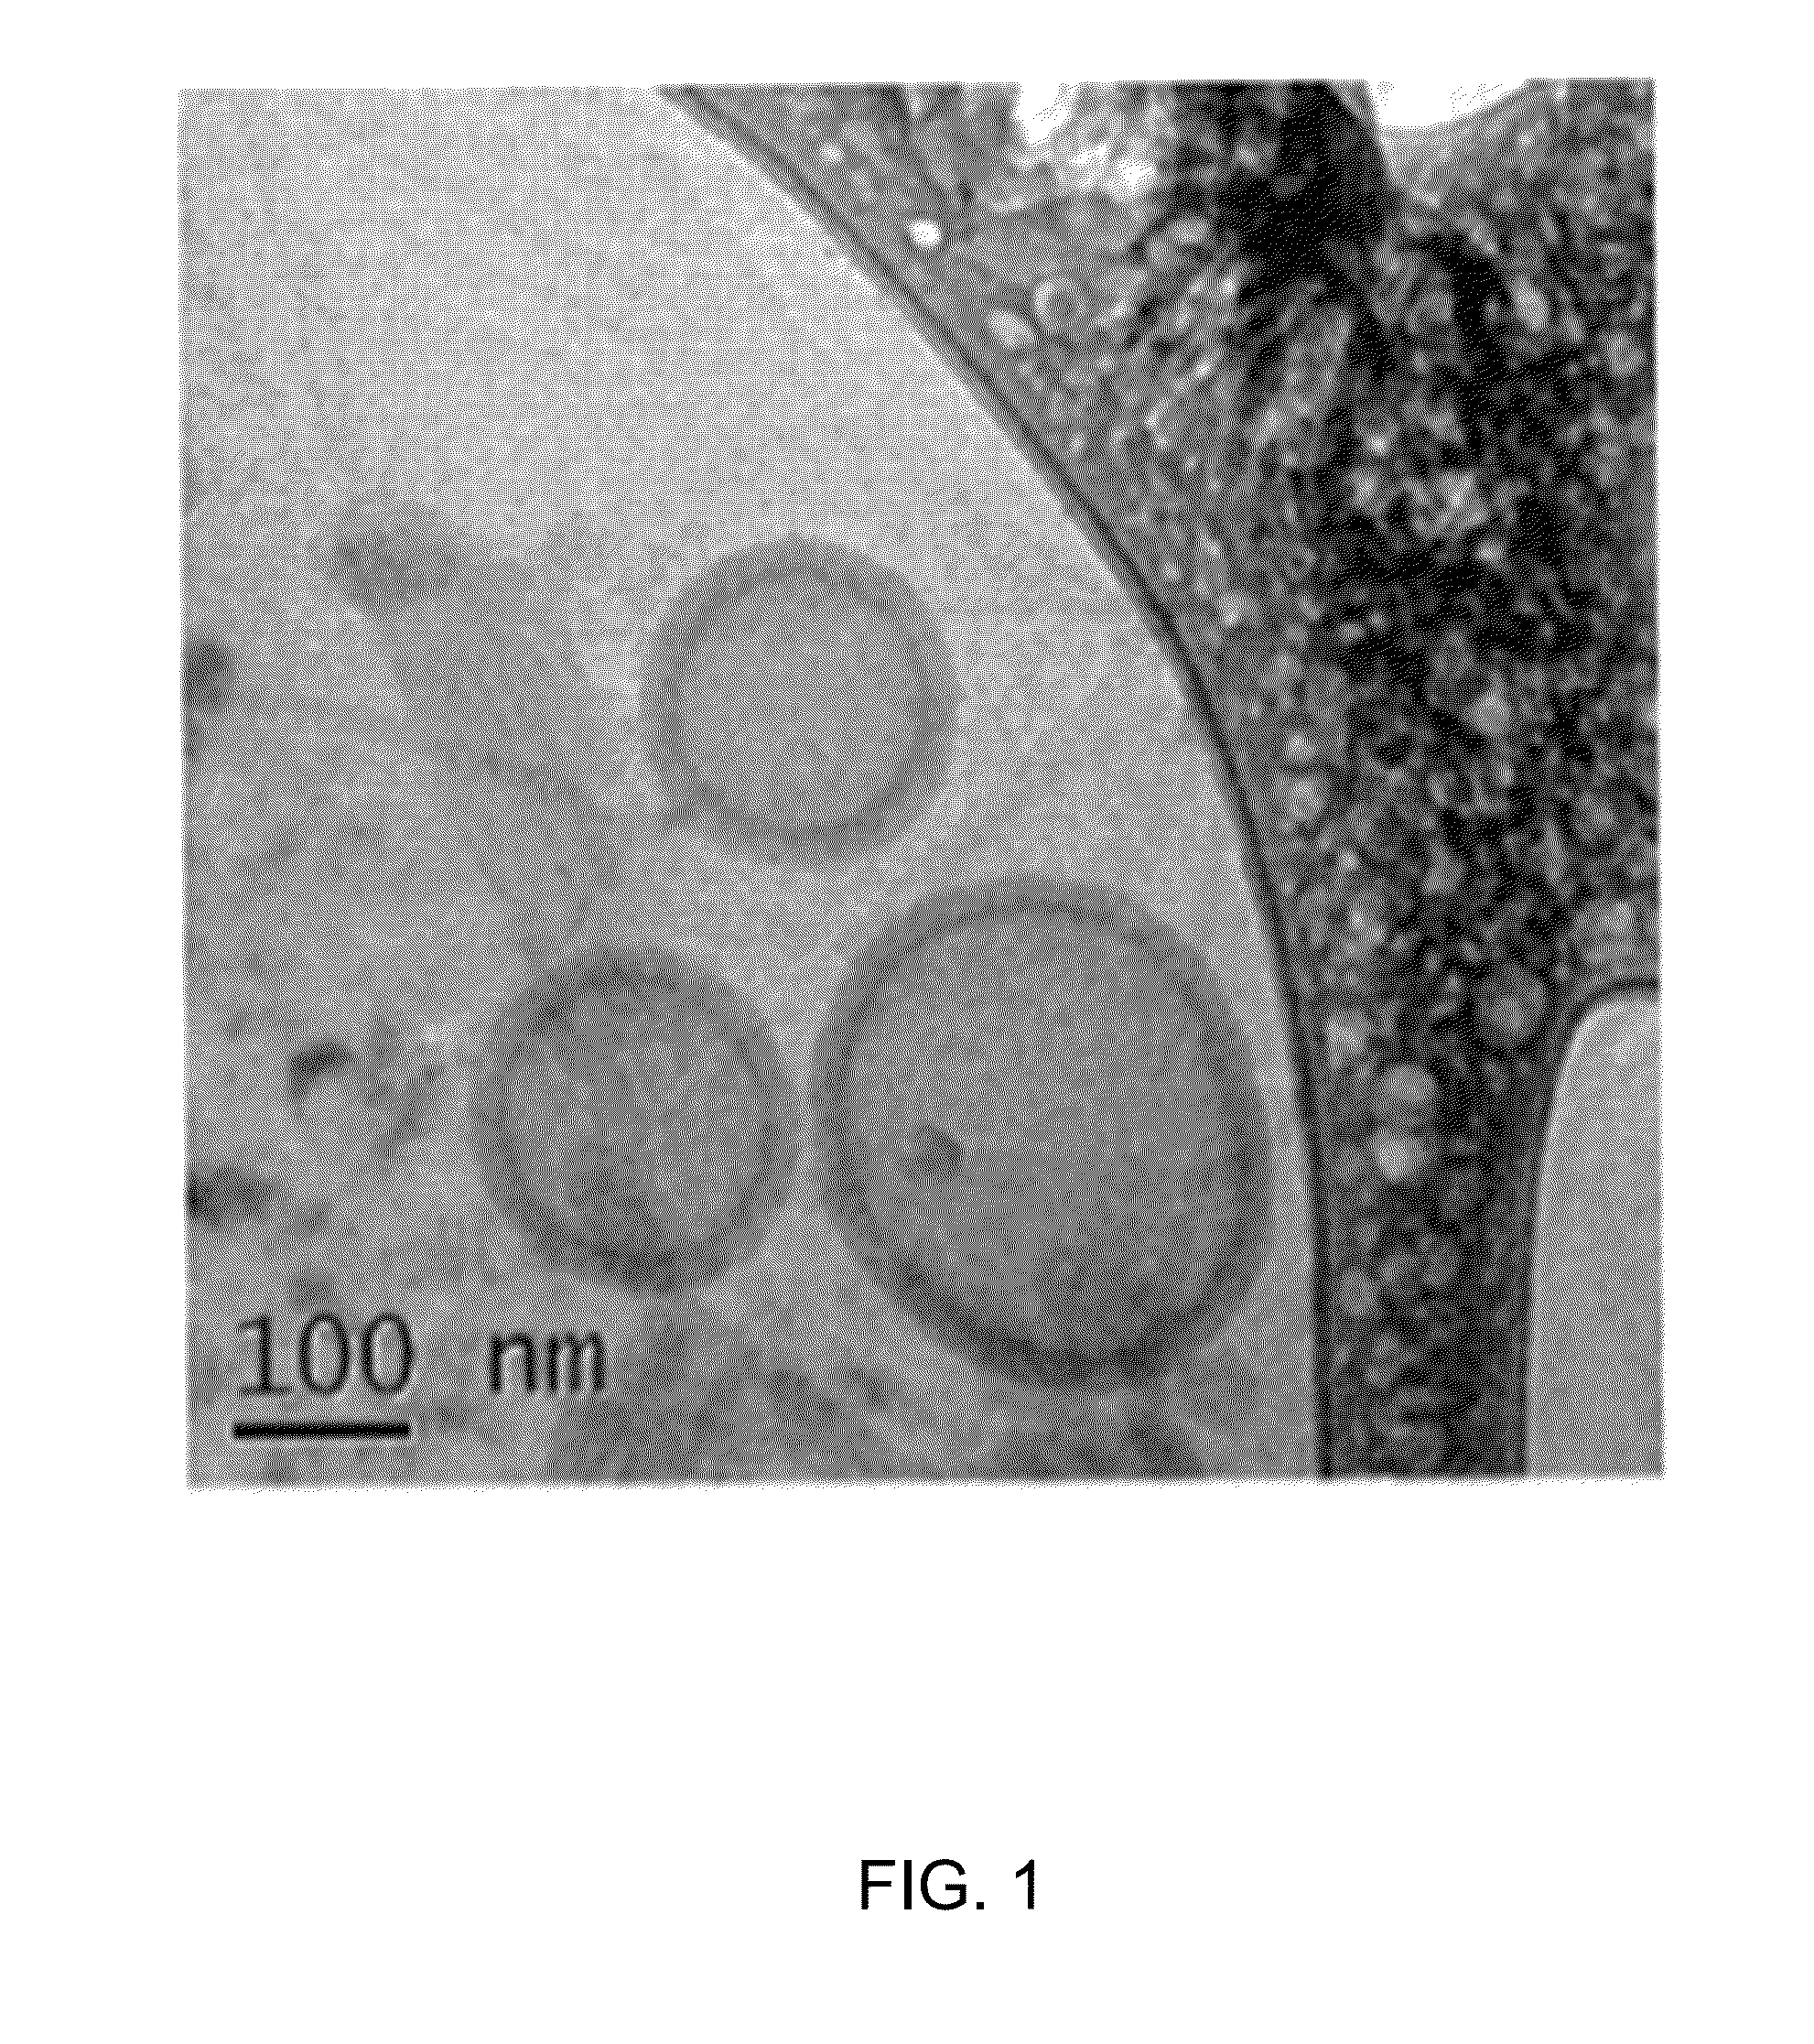 Biodegradable Nanoparticles as Novel Hemoglobin-Based Oxygen Carriers and Methods of Using the Same